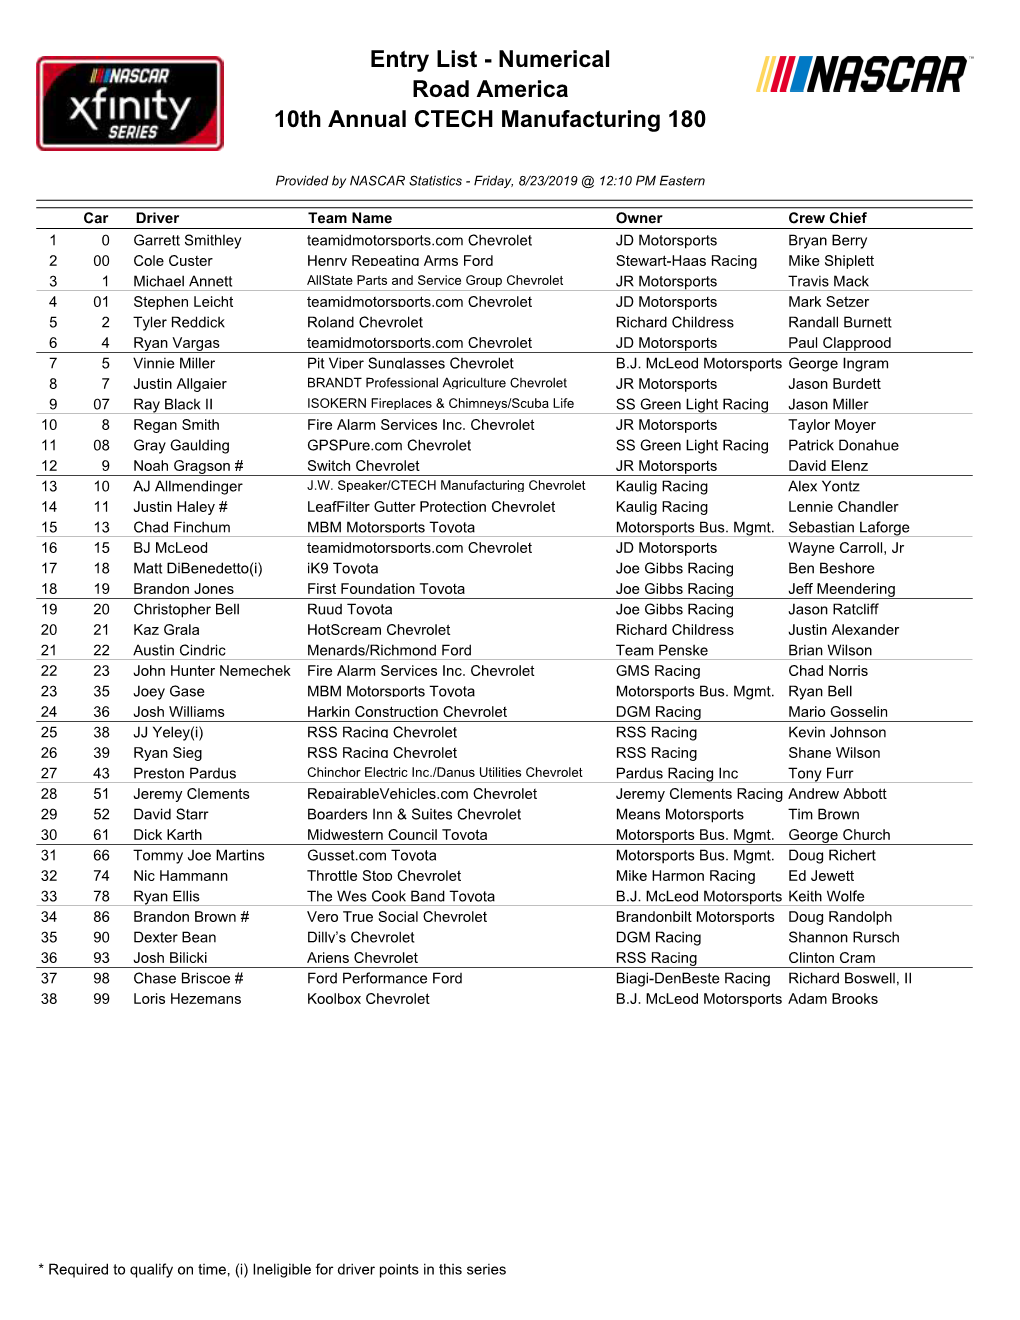 Entry List - Numerical Road America 10Th Annual CTECH Manufacturing 180